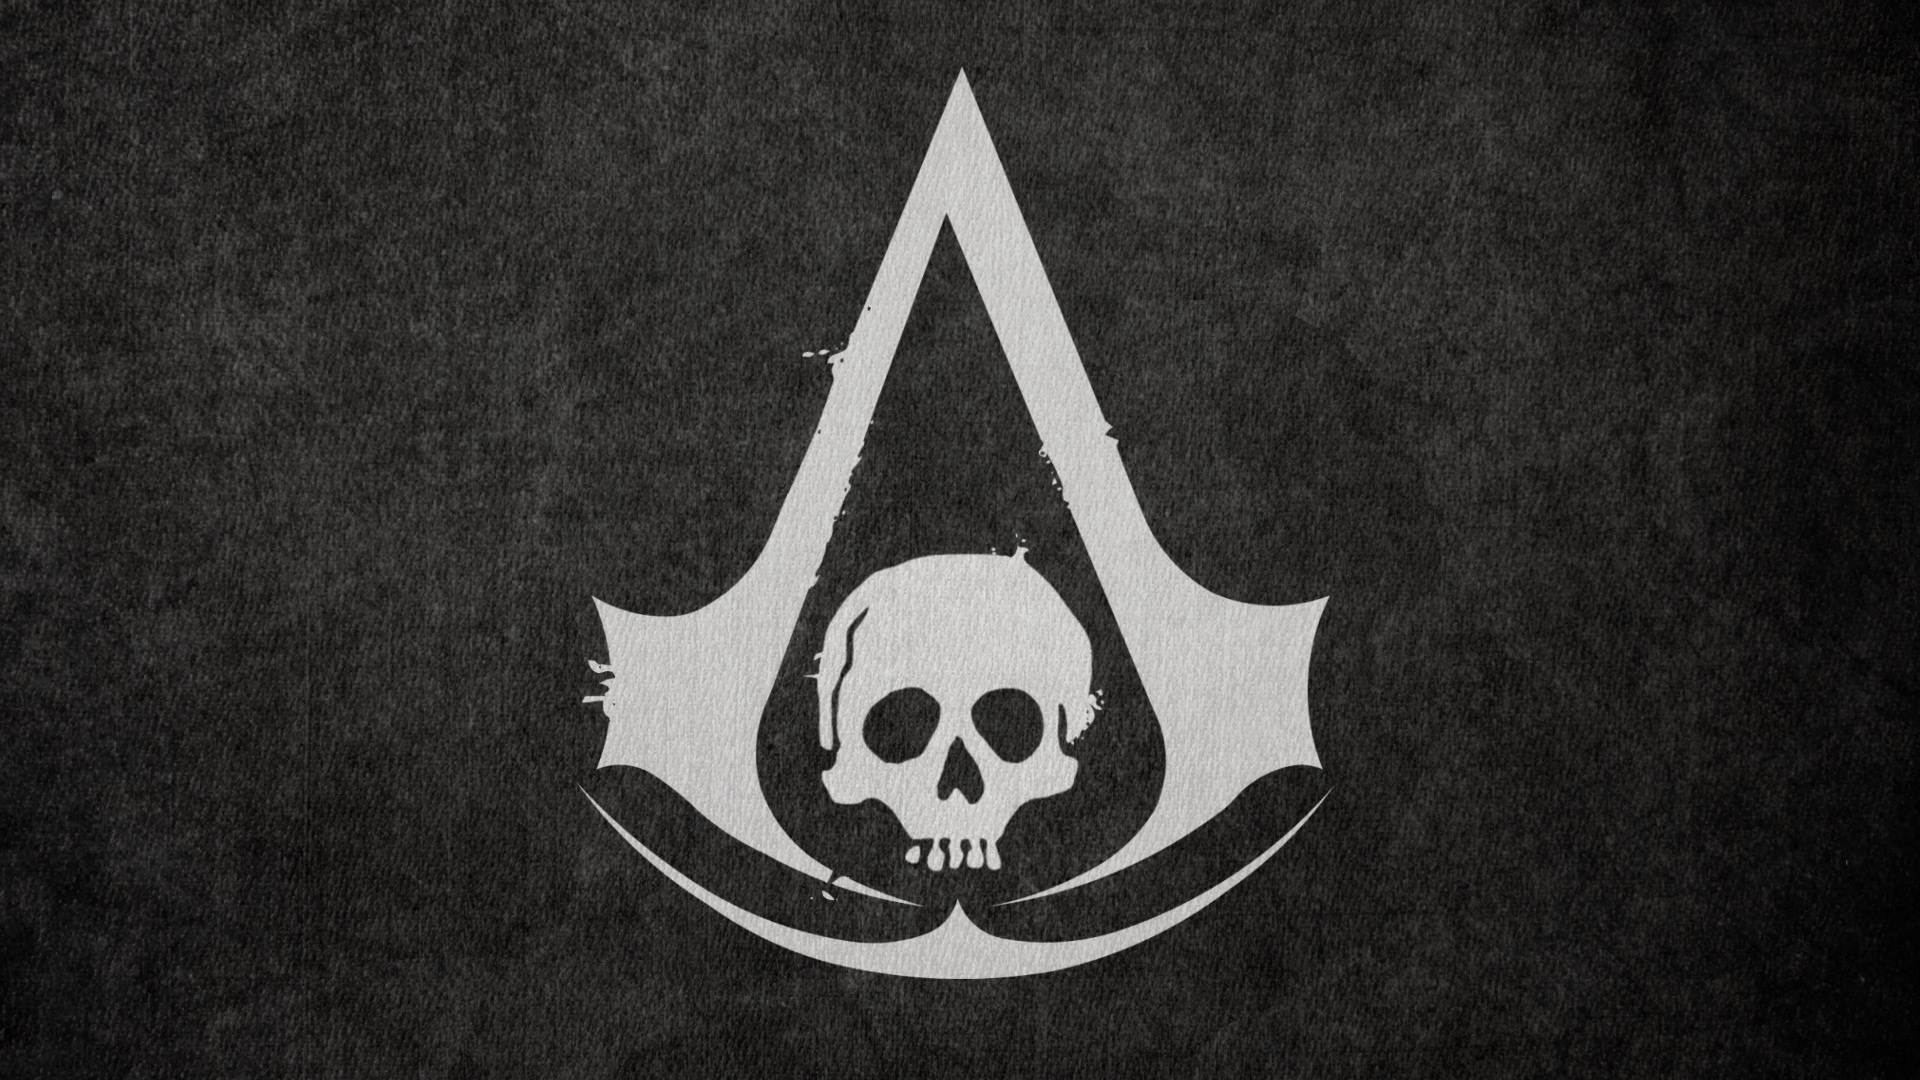 Download Assassins Creed Logo Wallpaper Background pictures in high 1920x1080